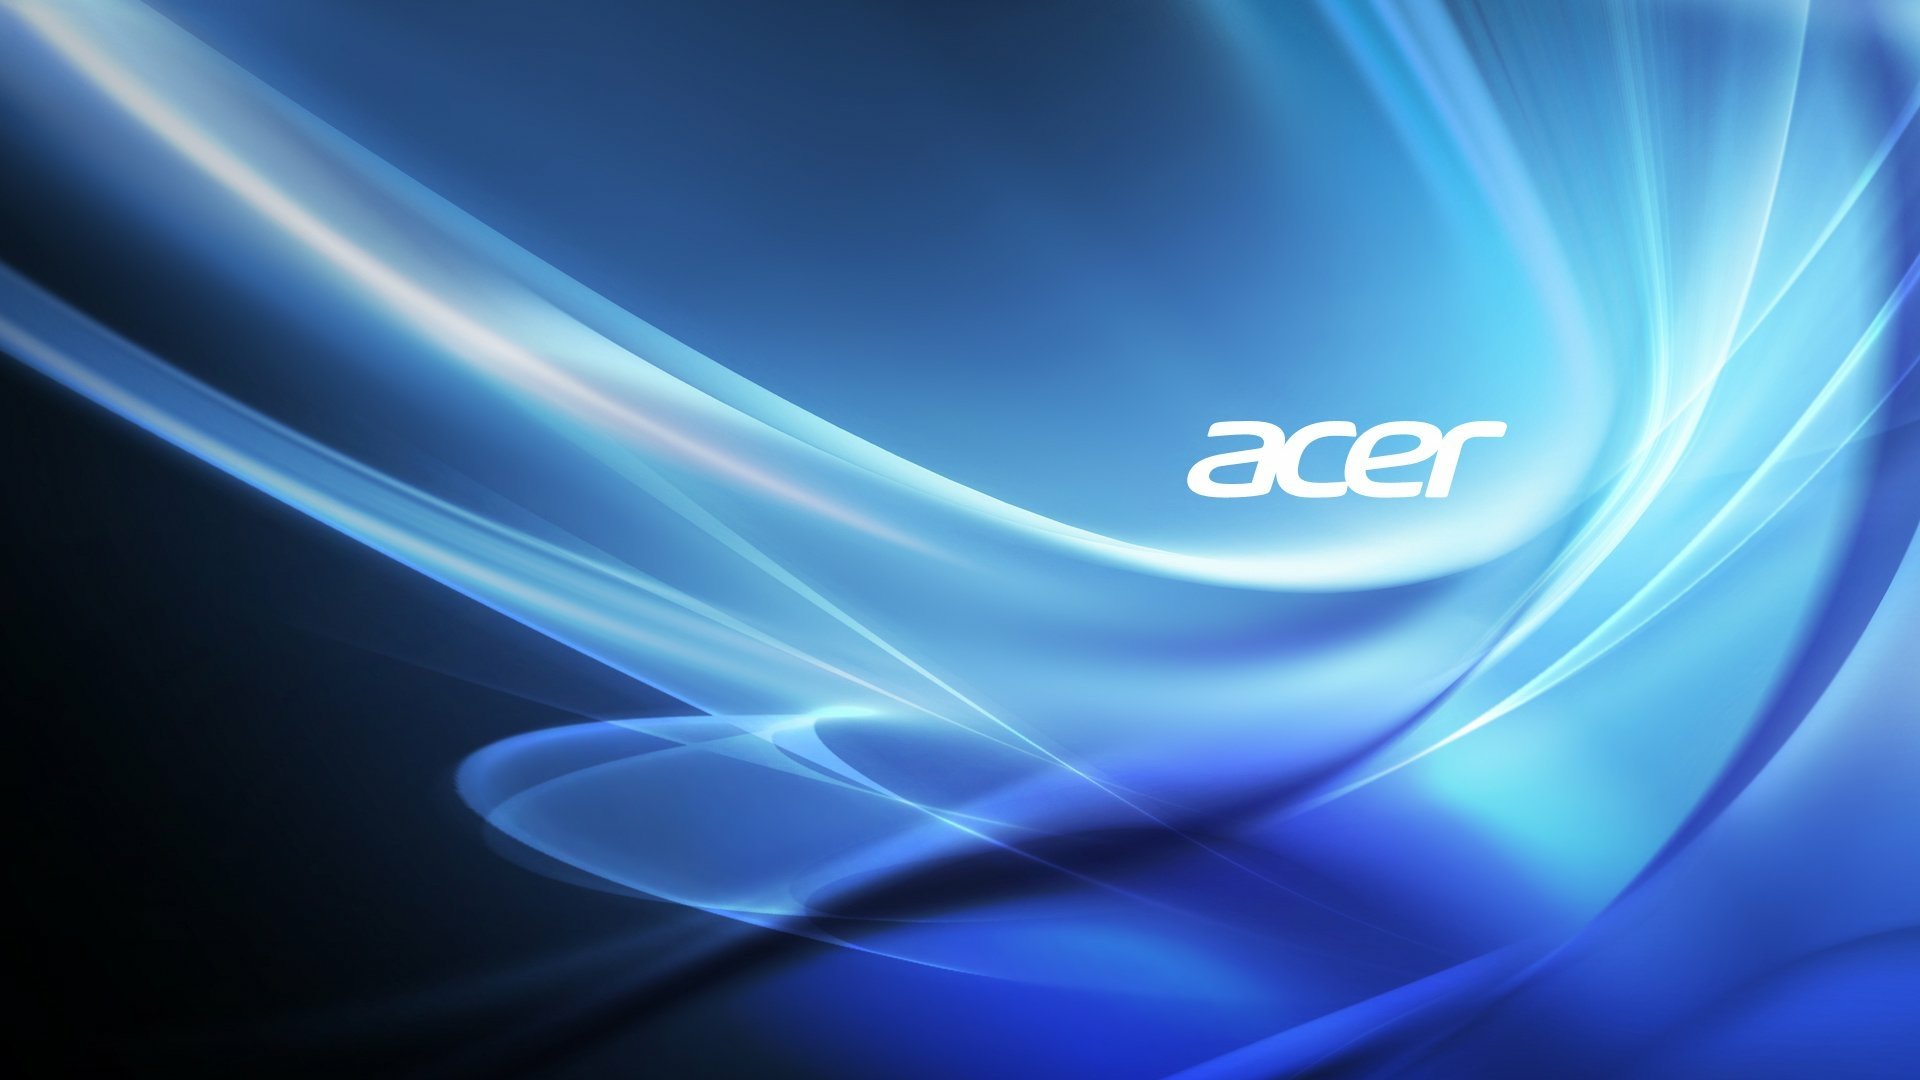 Acer Hd Wallpaper Background Image 1920x1080